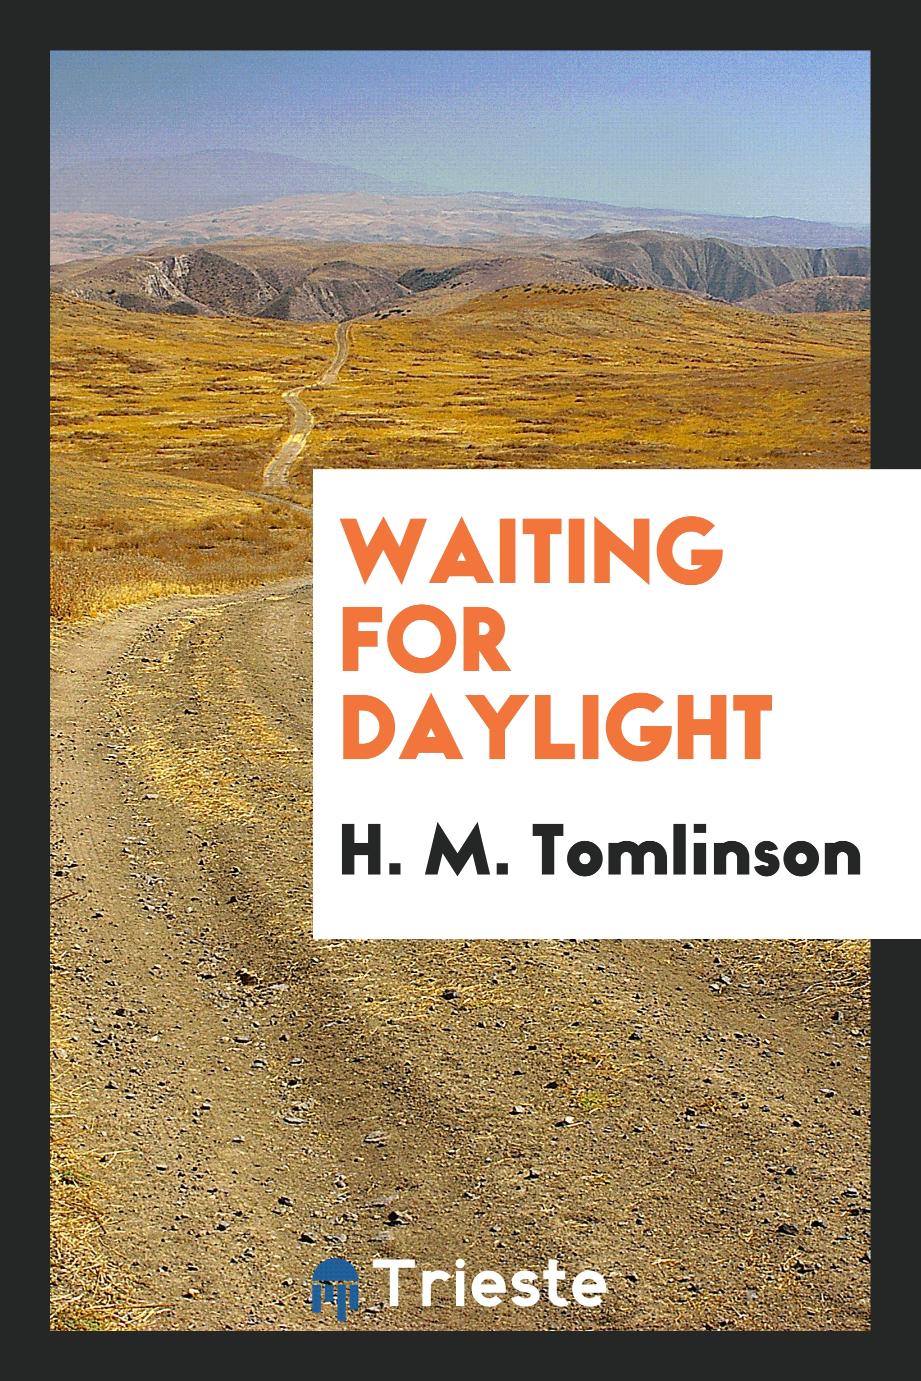 H. M. Tomlinson - Waiting for daylight